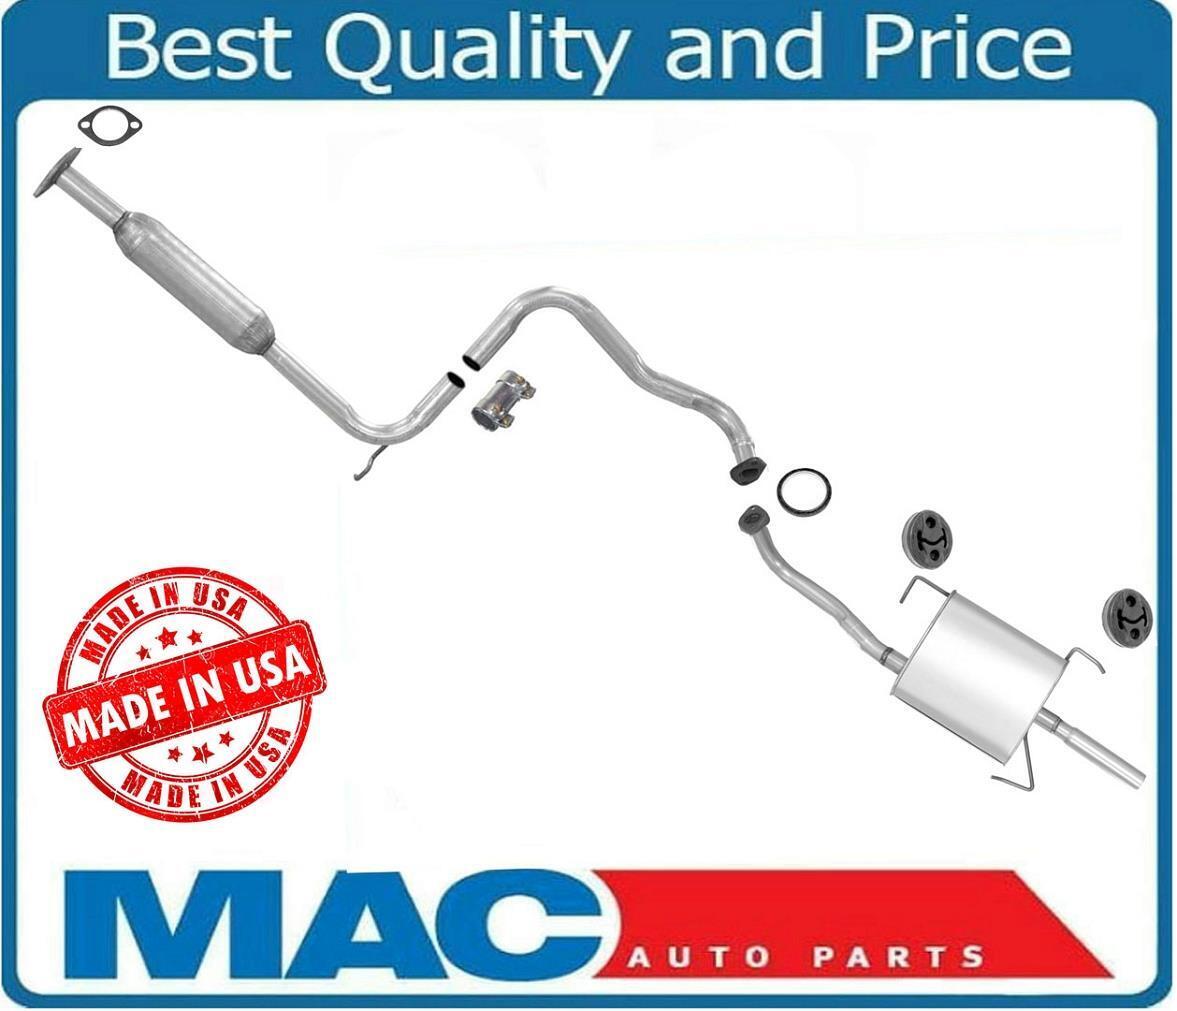 New Muffler Exhaust System for Nissan Sentra 1.6L 1991-1994